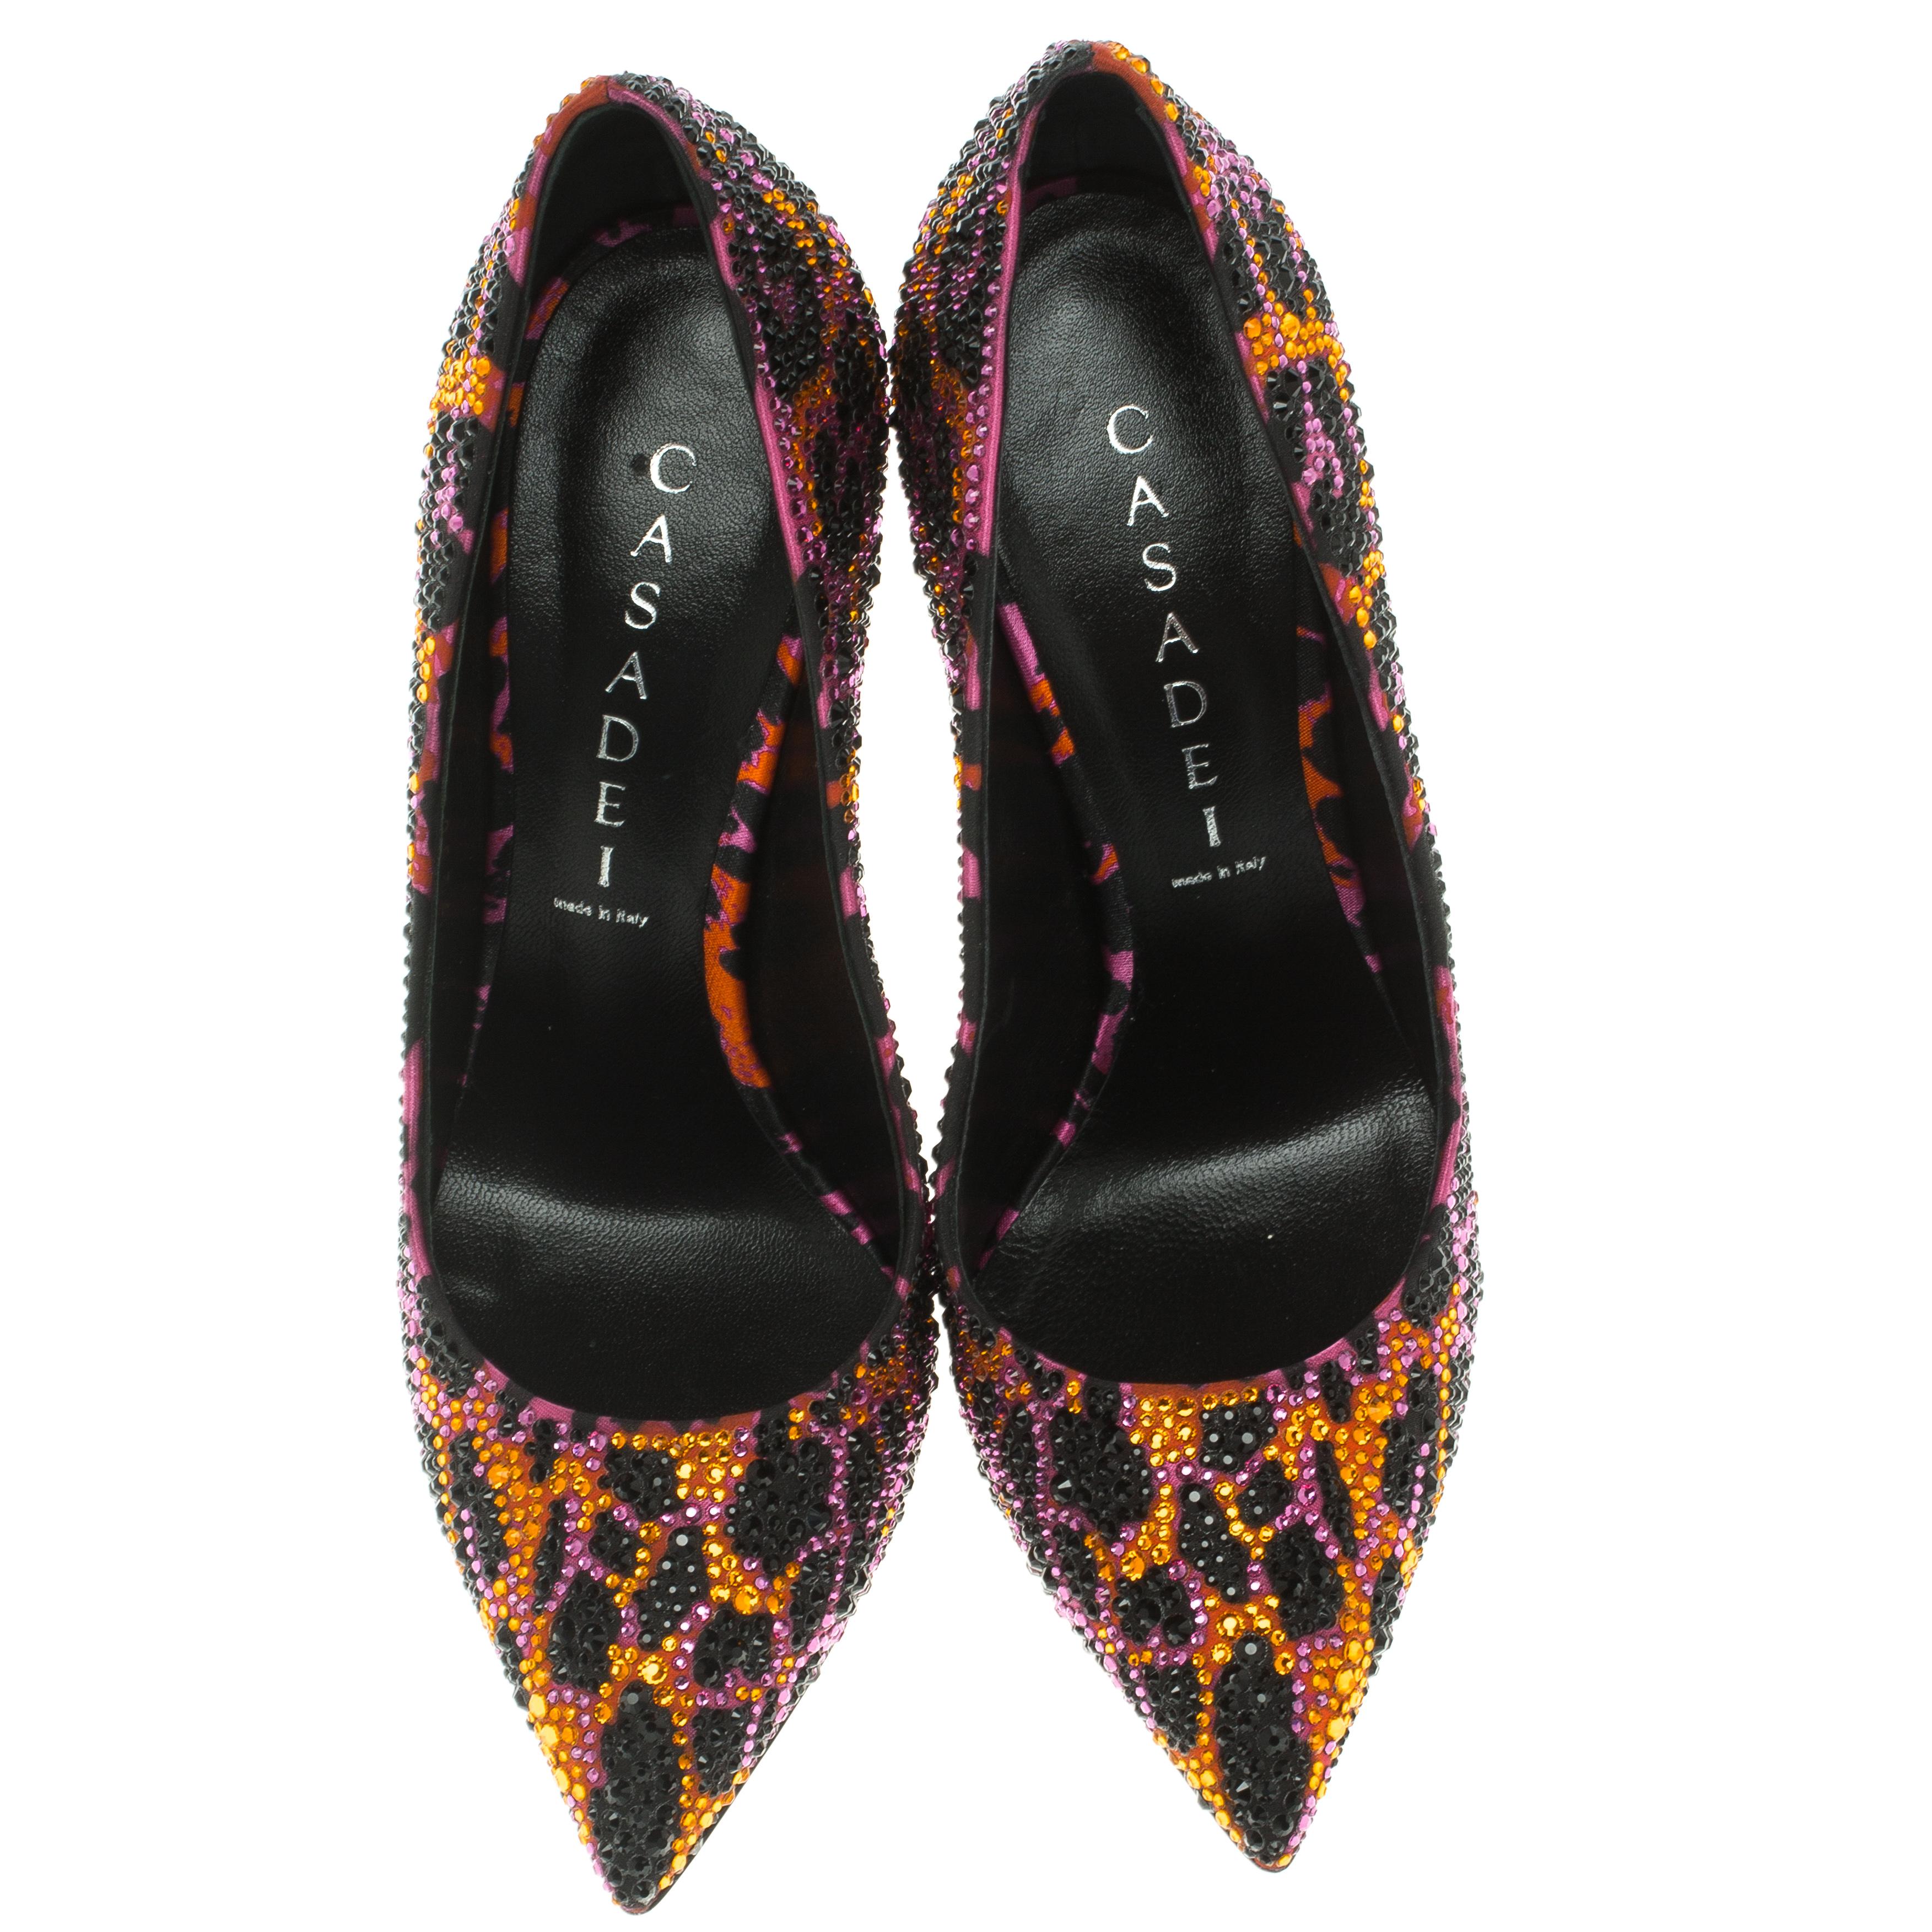 Don't you just wanna grab these pumps and try them on? They're beautiful to look at and versatile in design as well. Crafted from leather, these Casadei pumps carry an animal printed exterior lined with crystals along with pointed toes and blade